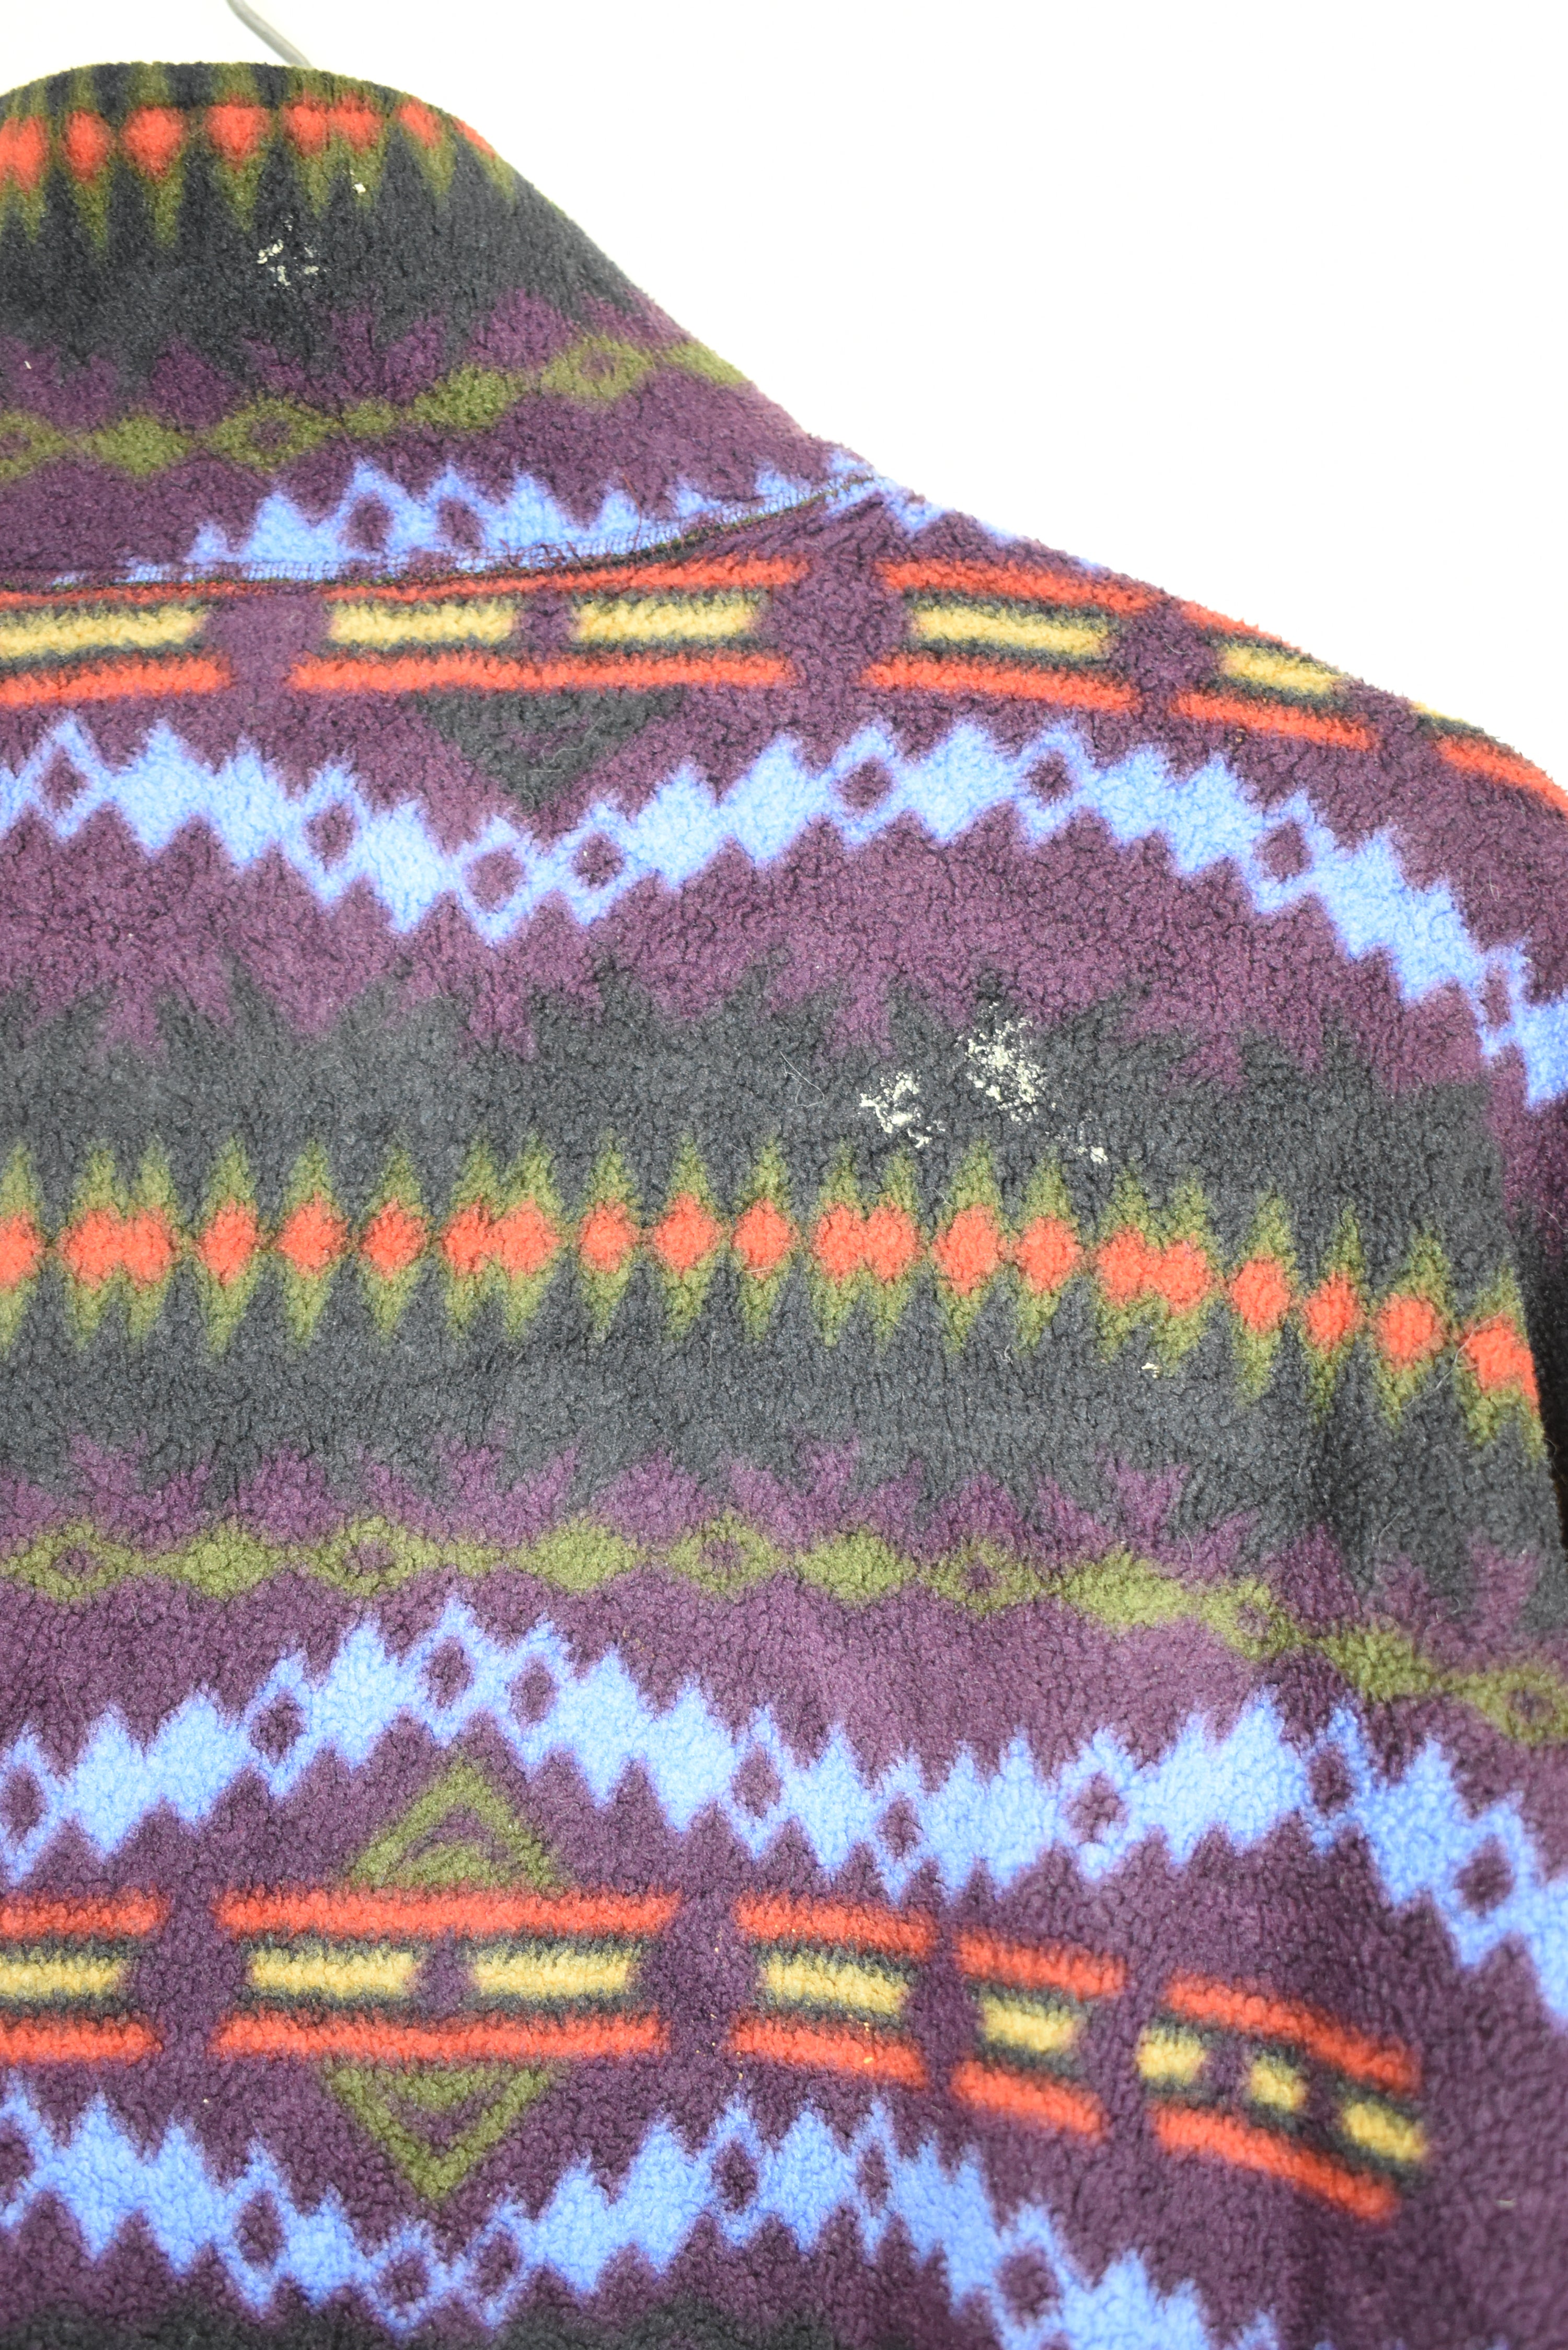 Vintage 90's Patagonia Printed Synchilla Shearling Sweater Fleece XL